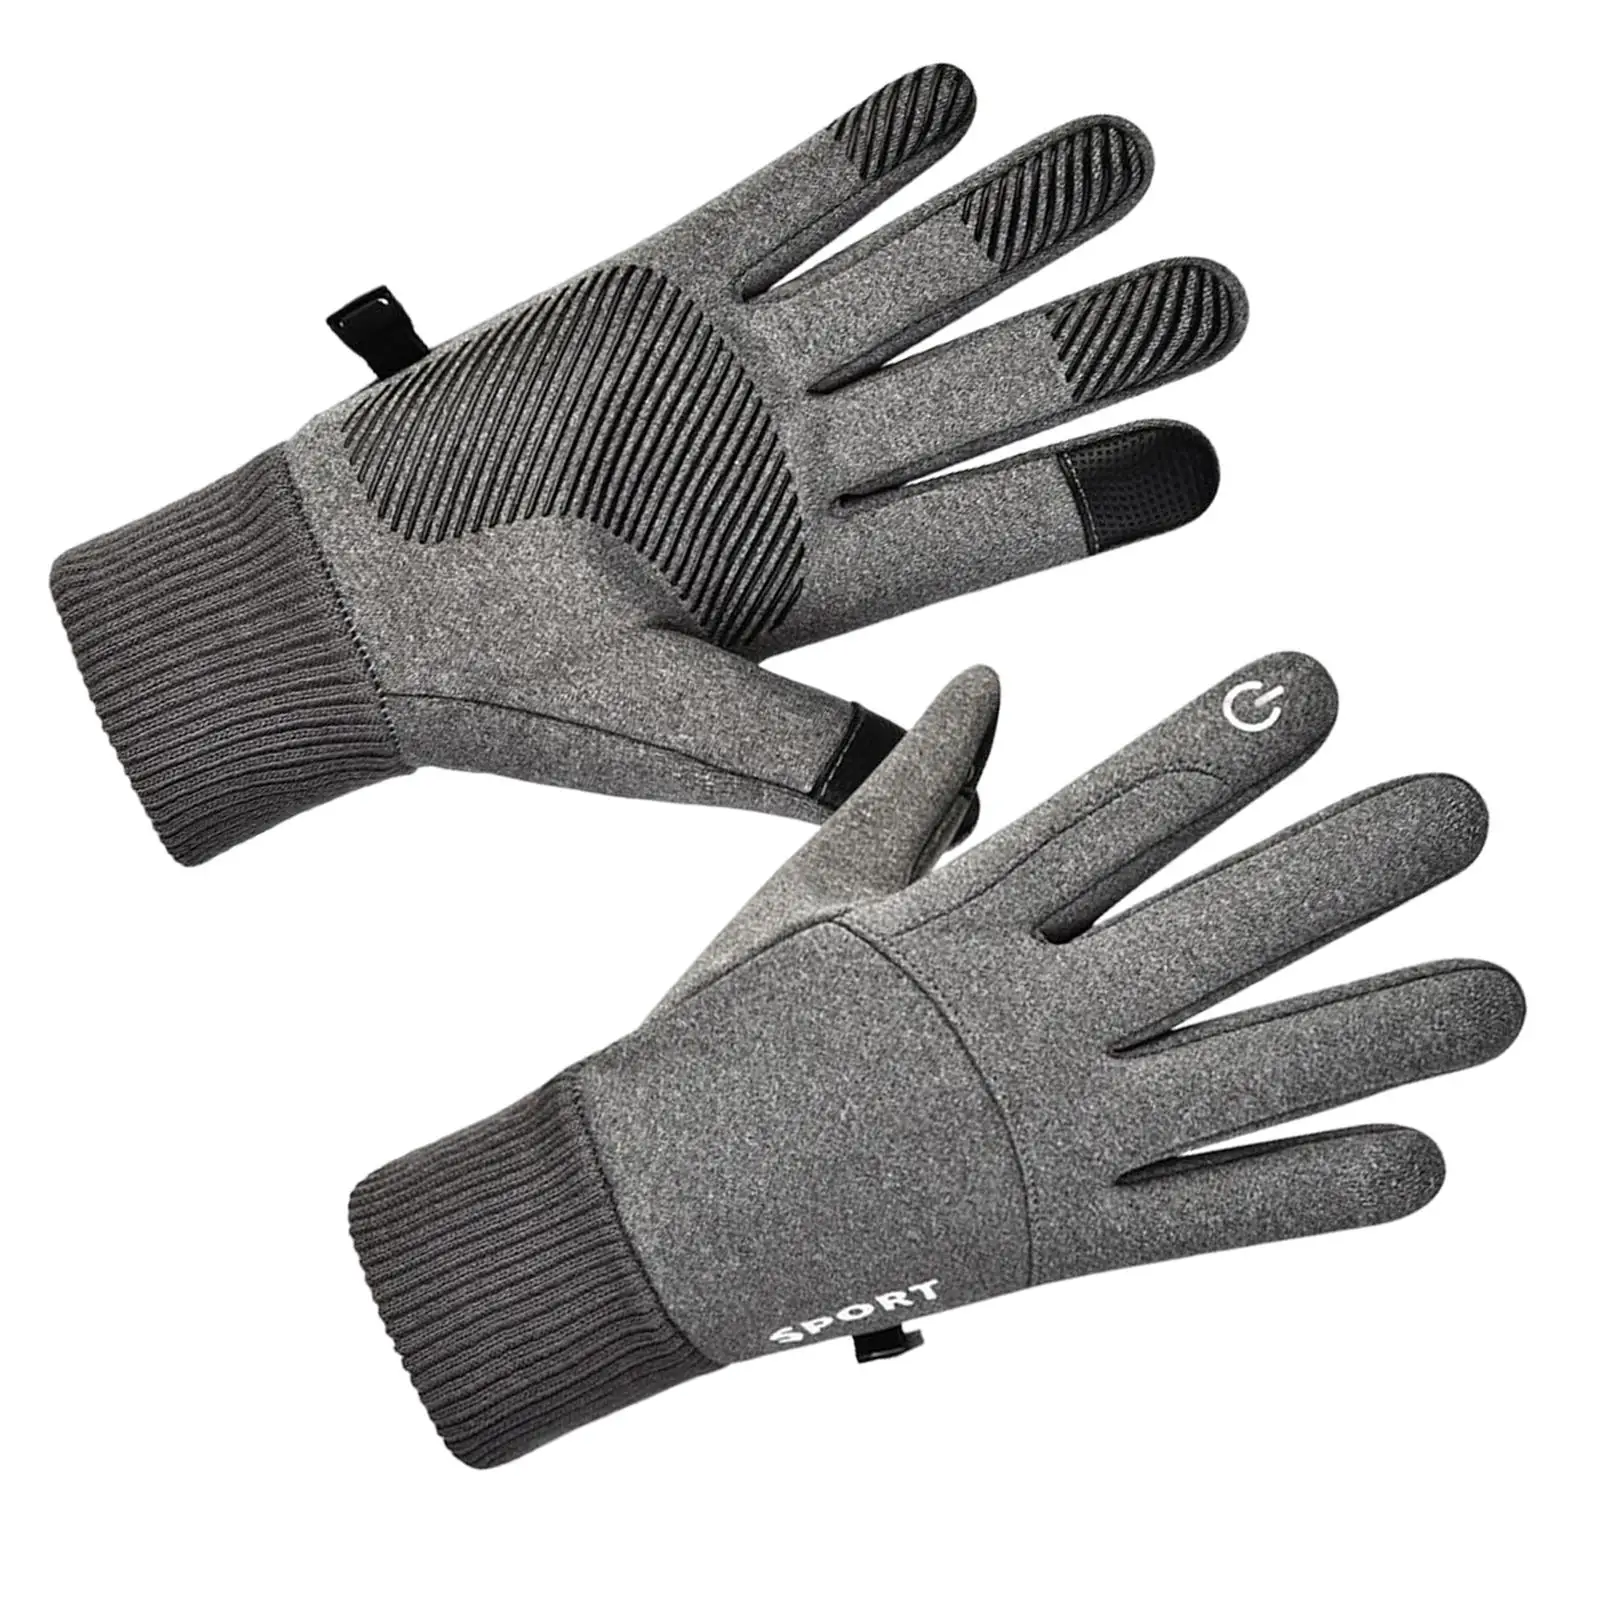 Cycling Gloves, Durable, Non-slip, Comfortable, Windproof, Fashion, Warm Gloves